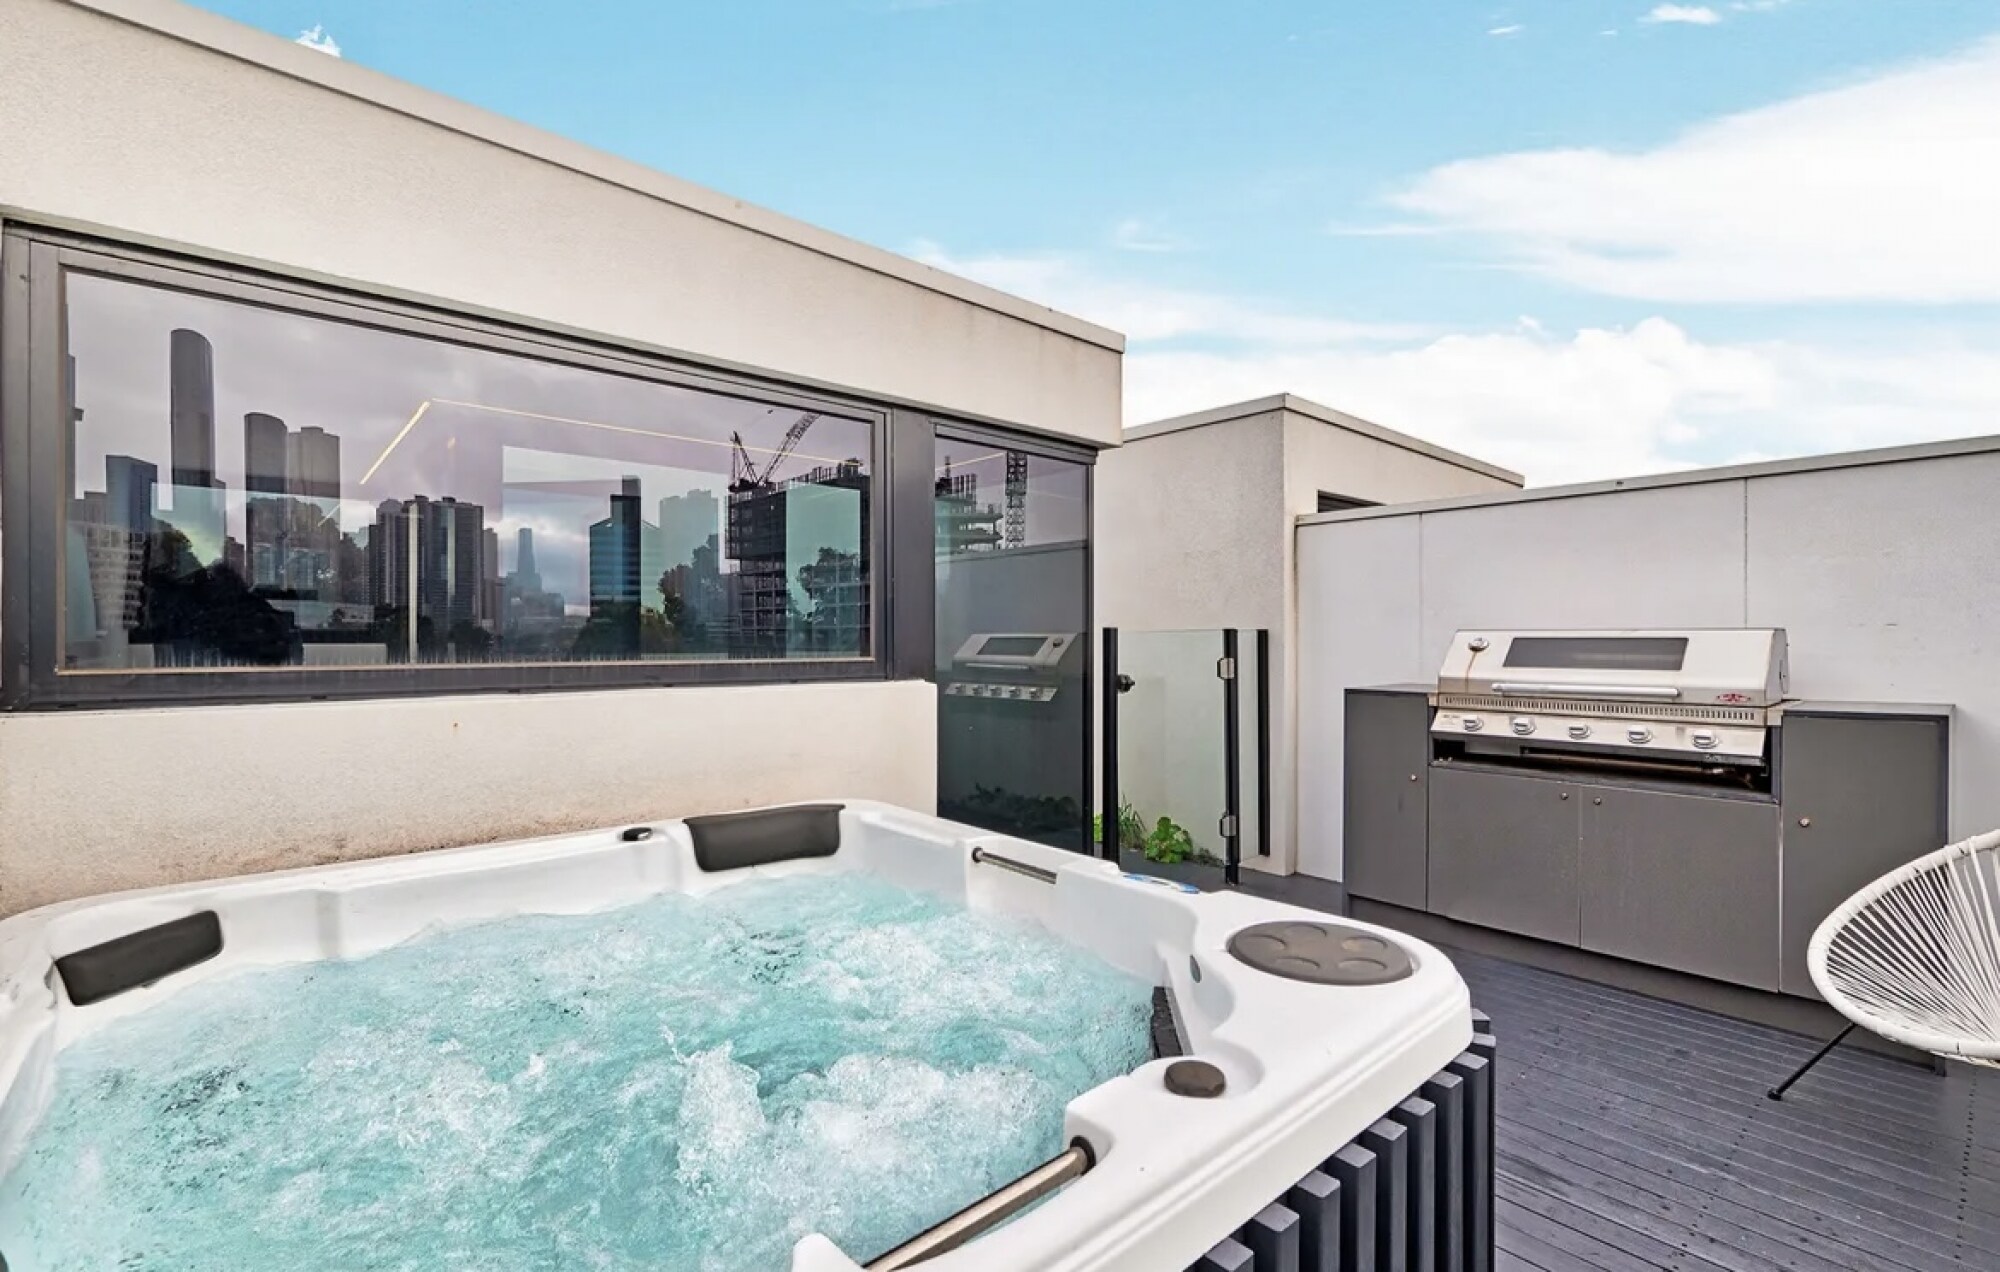 Rooftop Jacuzzi and BBQ grill